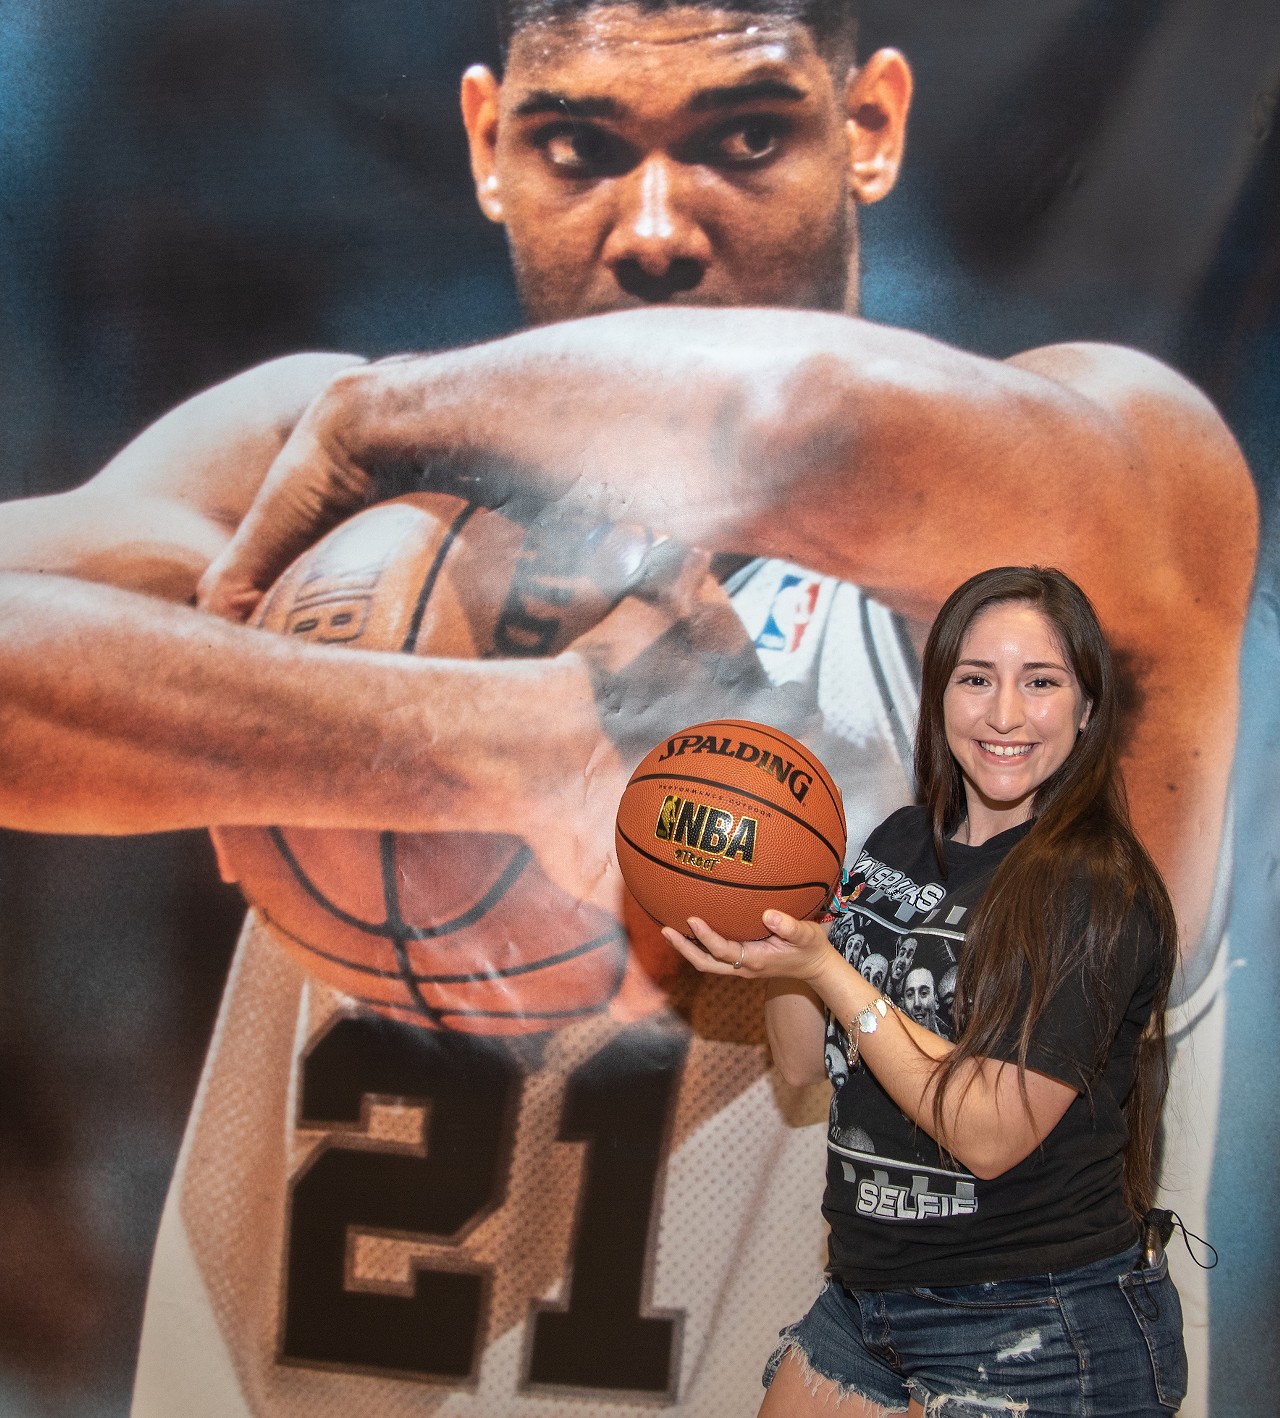 All the fans we saw at the Spurs' Tim Duncan Hall of Fame Photo Walk